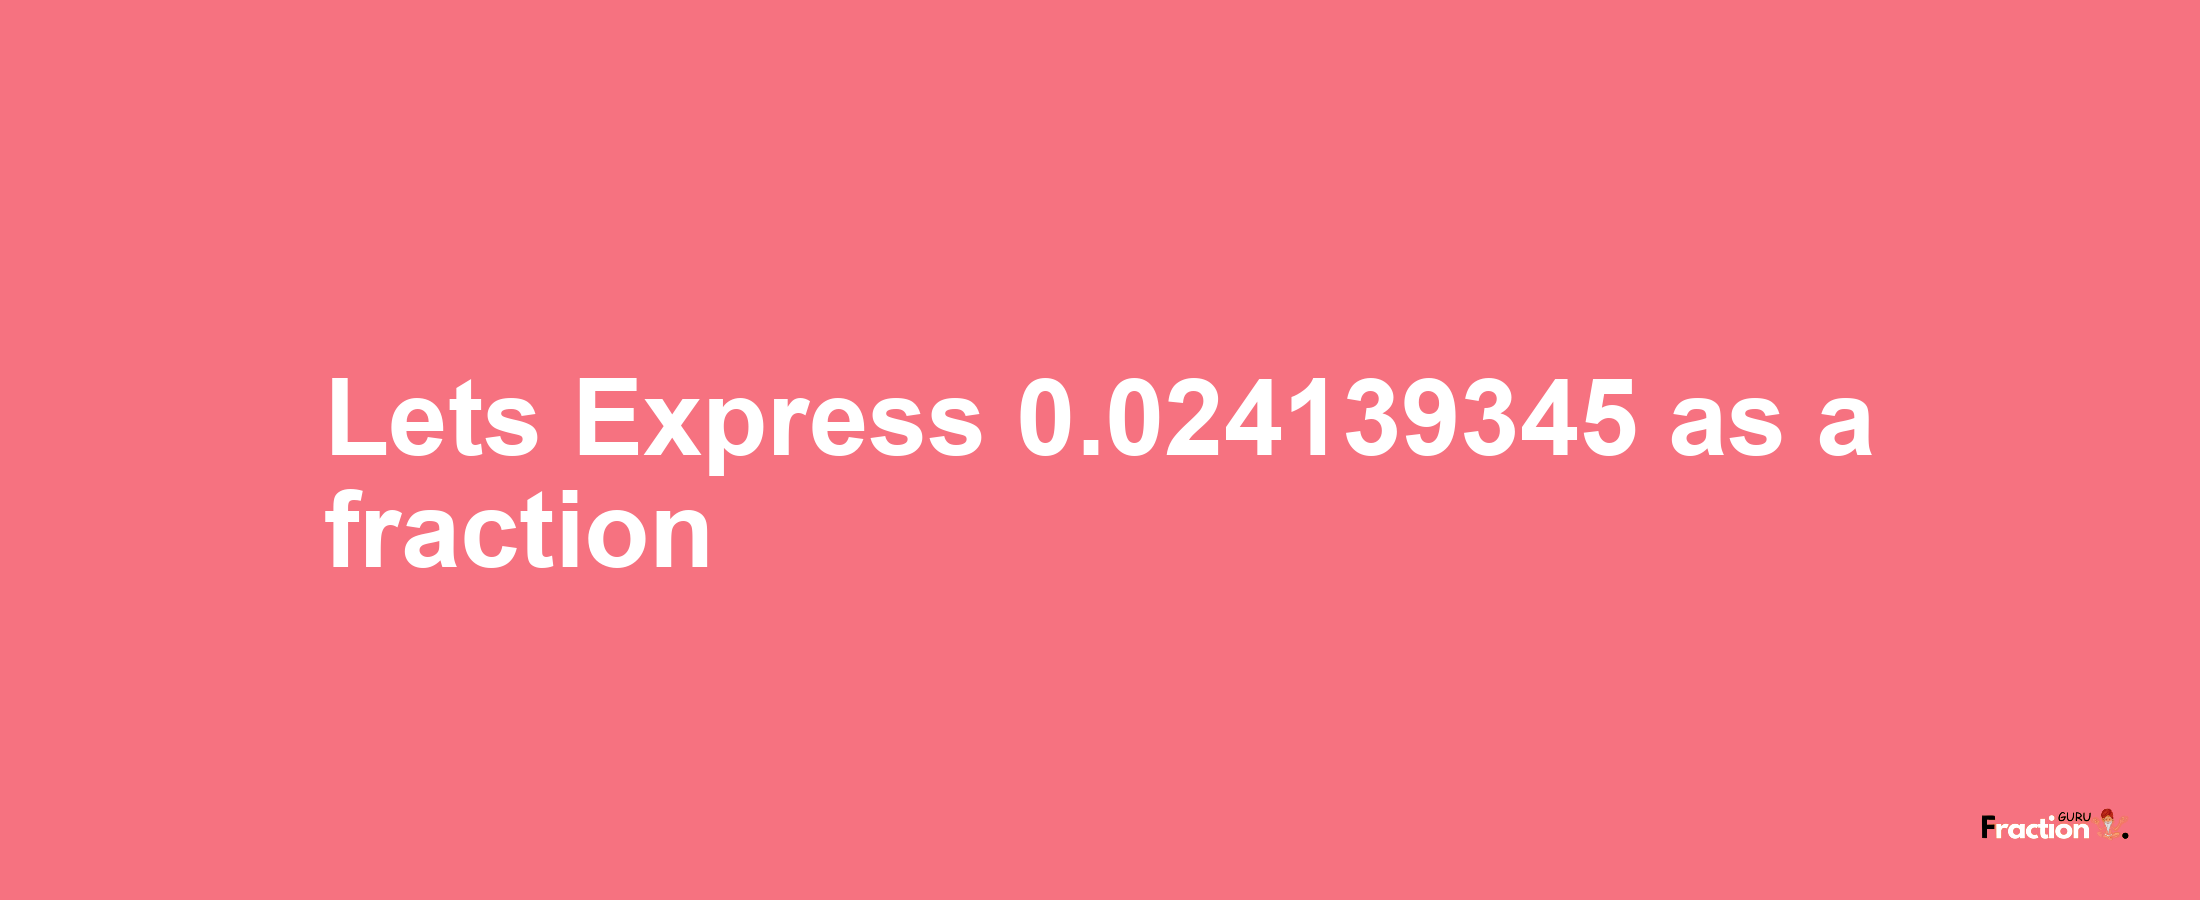 Lets Express 0.024139345 as afraction